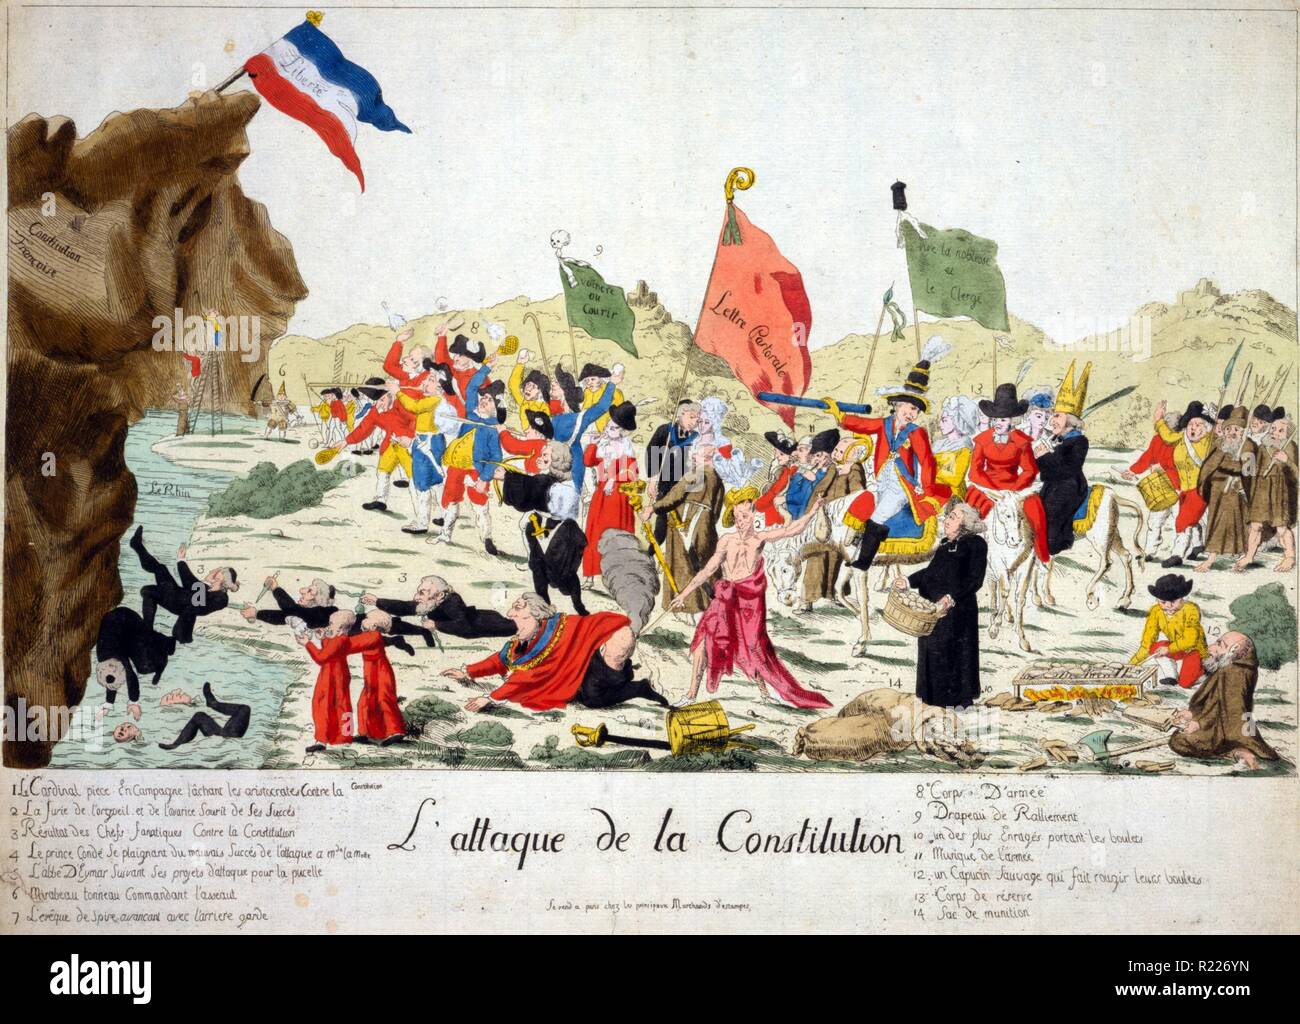 L'Attaque de la constitution 1792. Cartoon showing clergy, nobility, and fugitive counterrevolutionaries, carrying flags labeled 'Vive la noblesse et le Clerge', 'Lettre Pastorale', and 'Voincre ou Courir', attacking a rock, identified as the 'Constitution Francoise', on which sits the French flag labeled 'Liberte' on the far left, across the Rhine. Stock Photo